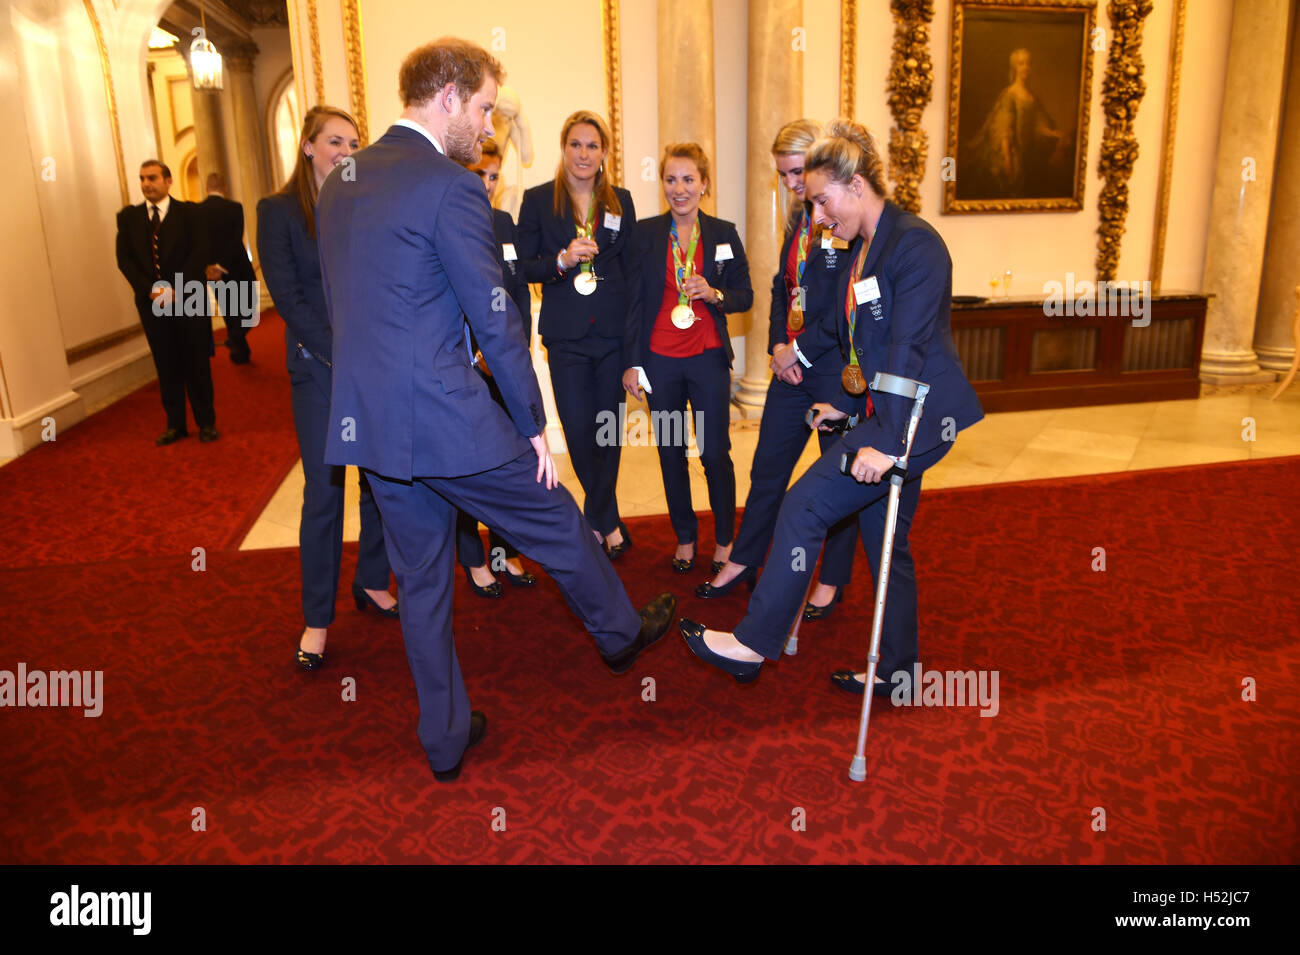 Prince Harry meets the ladies Hockey Team with Susannah Townsend on crutches during a reception for Team GB and ParalympicsGB medallists from the 2016 Olympic and Paralympic Games at Buckingham Palace in London. Stock Photo